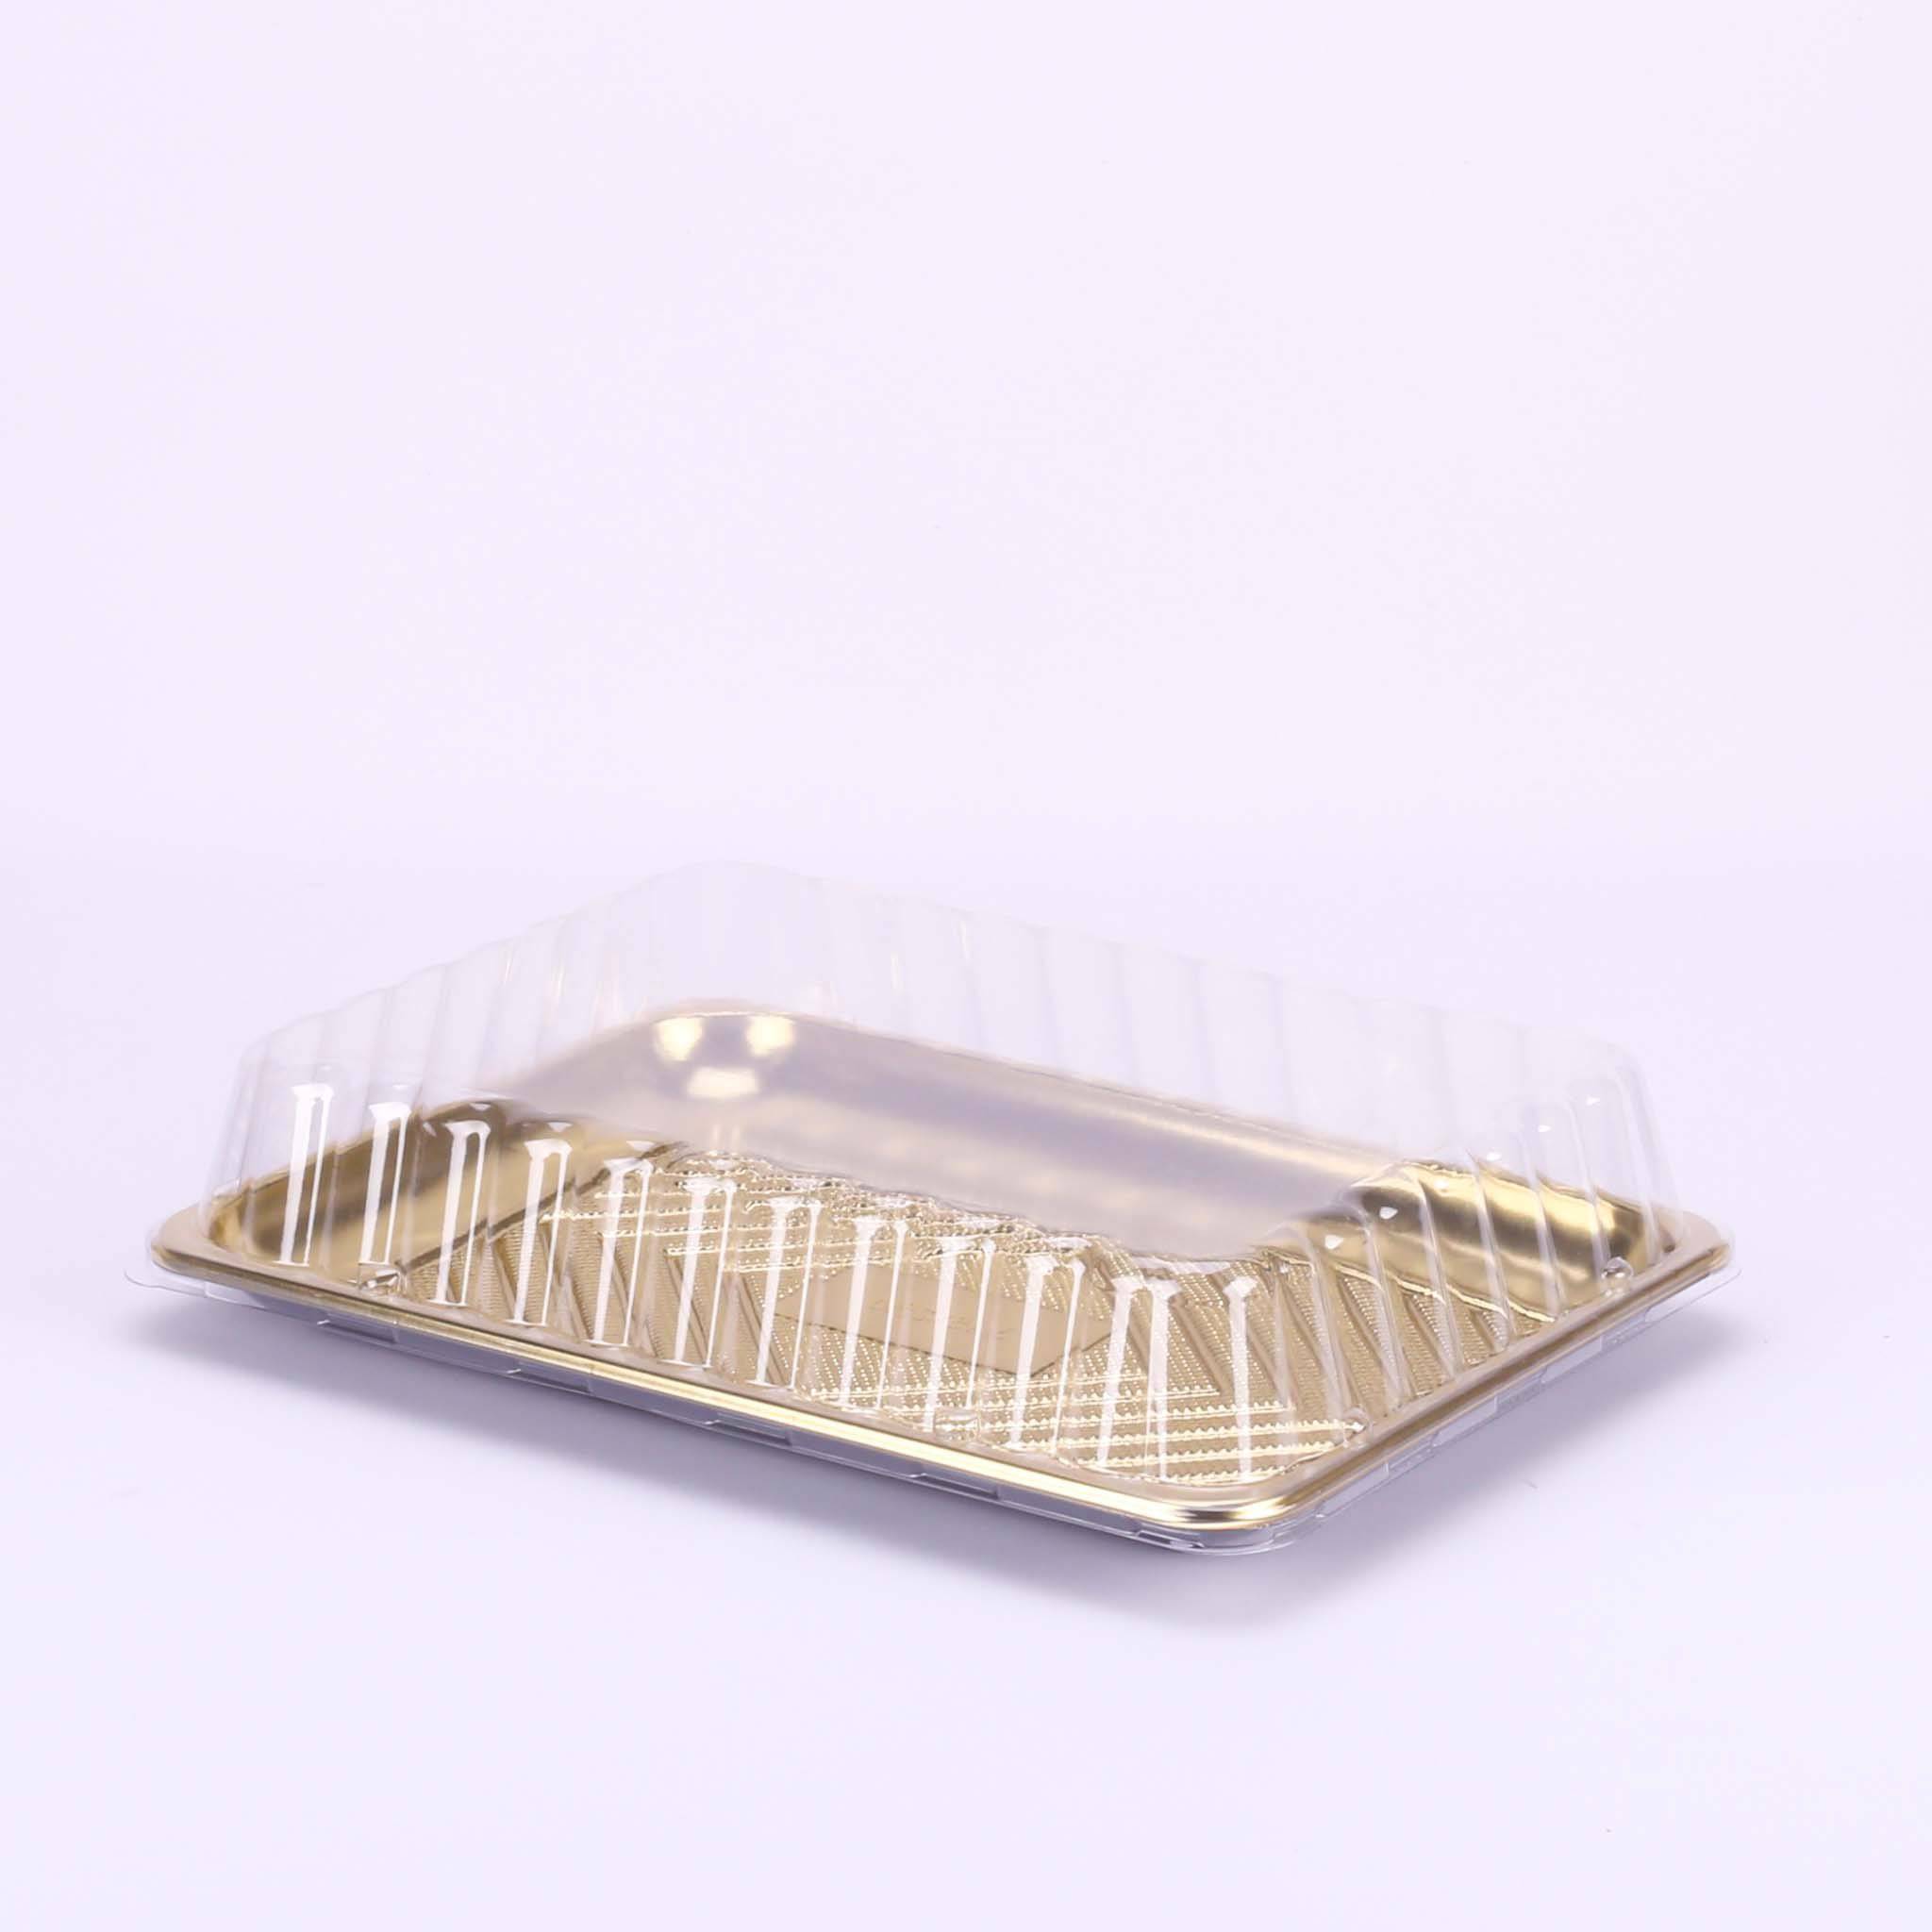 Gold Base Rectangle Cake Container With Lid